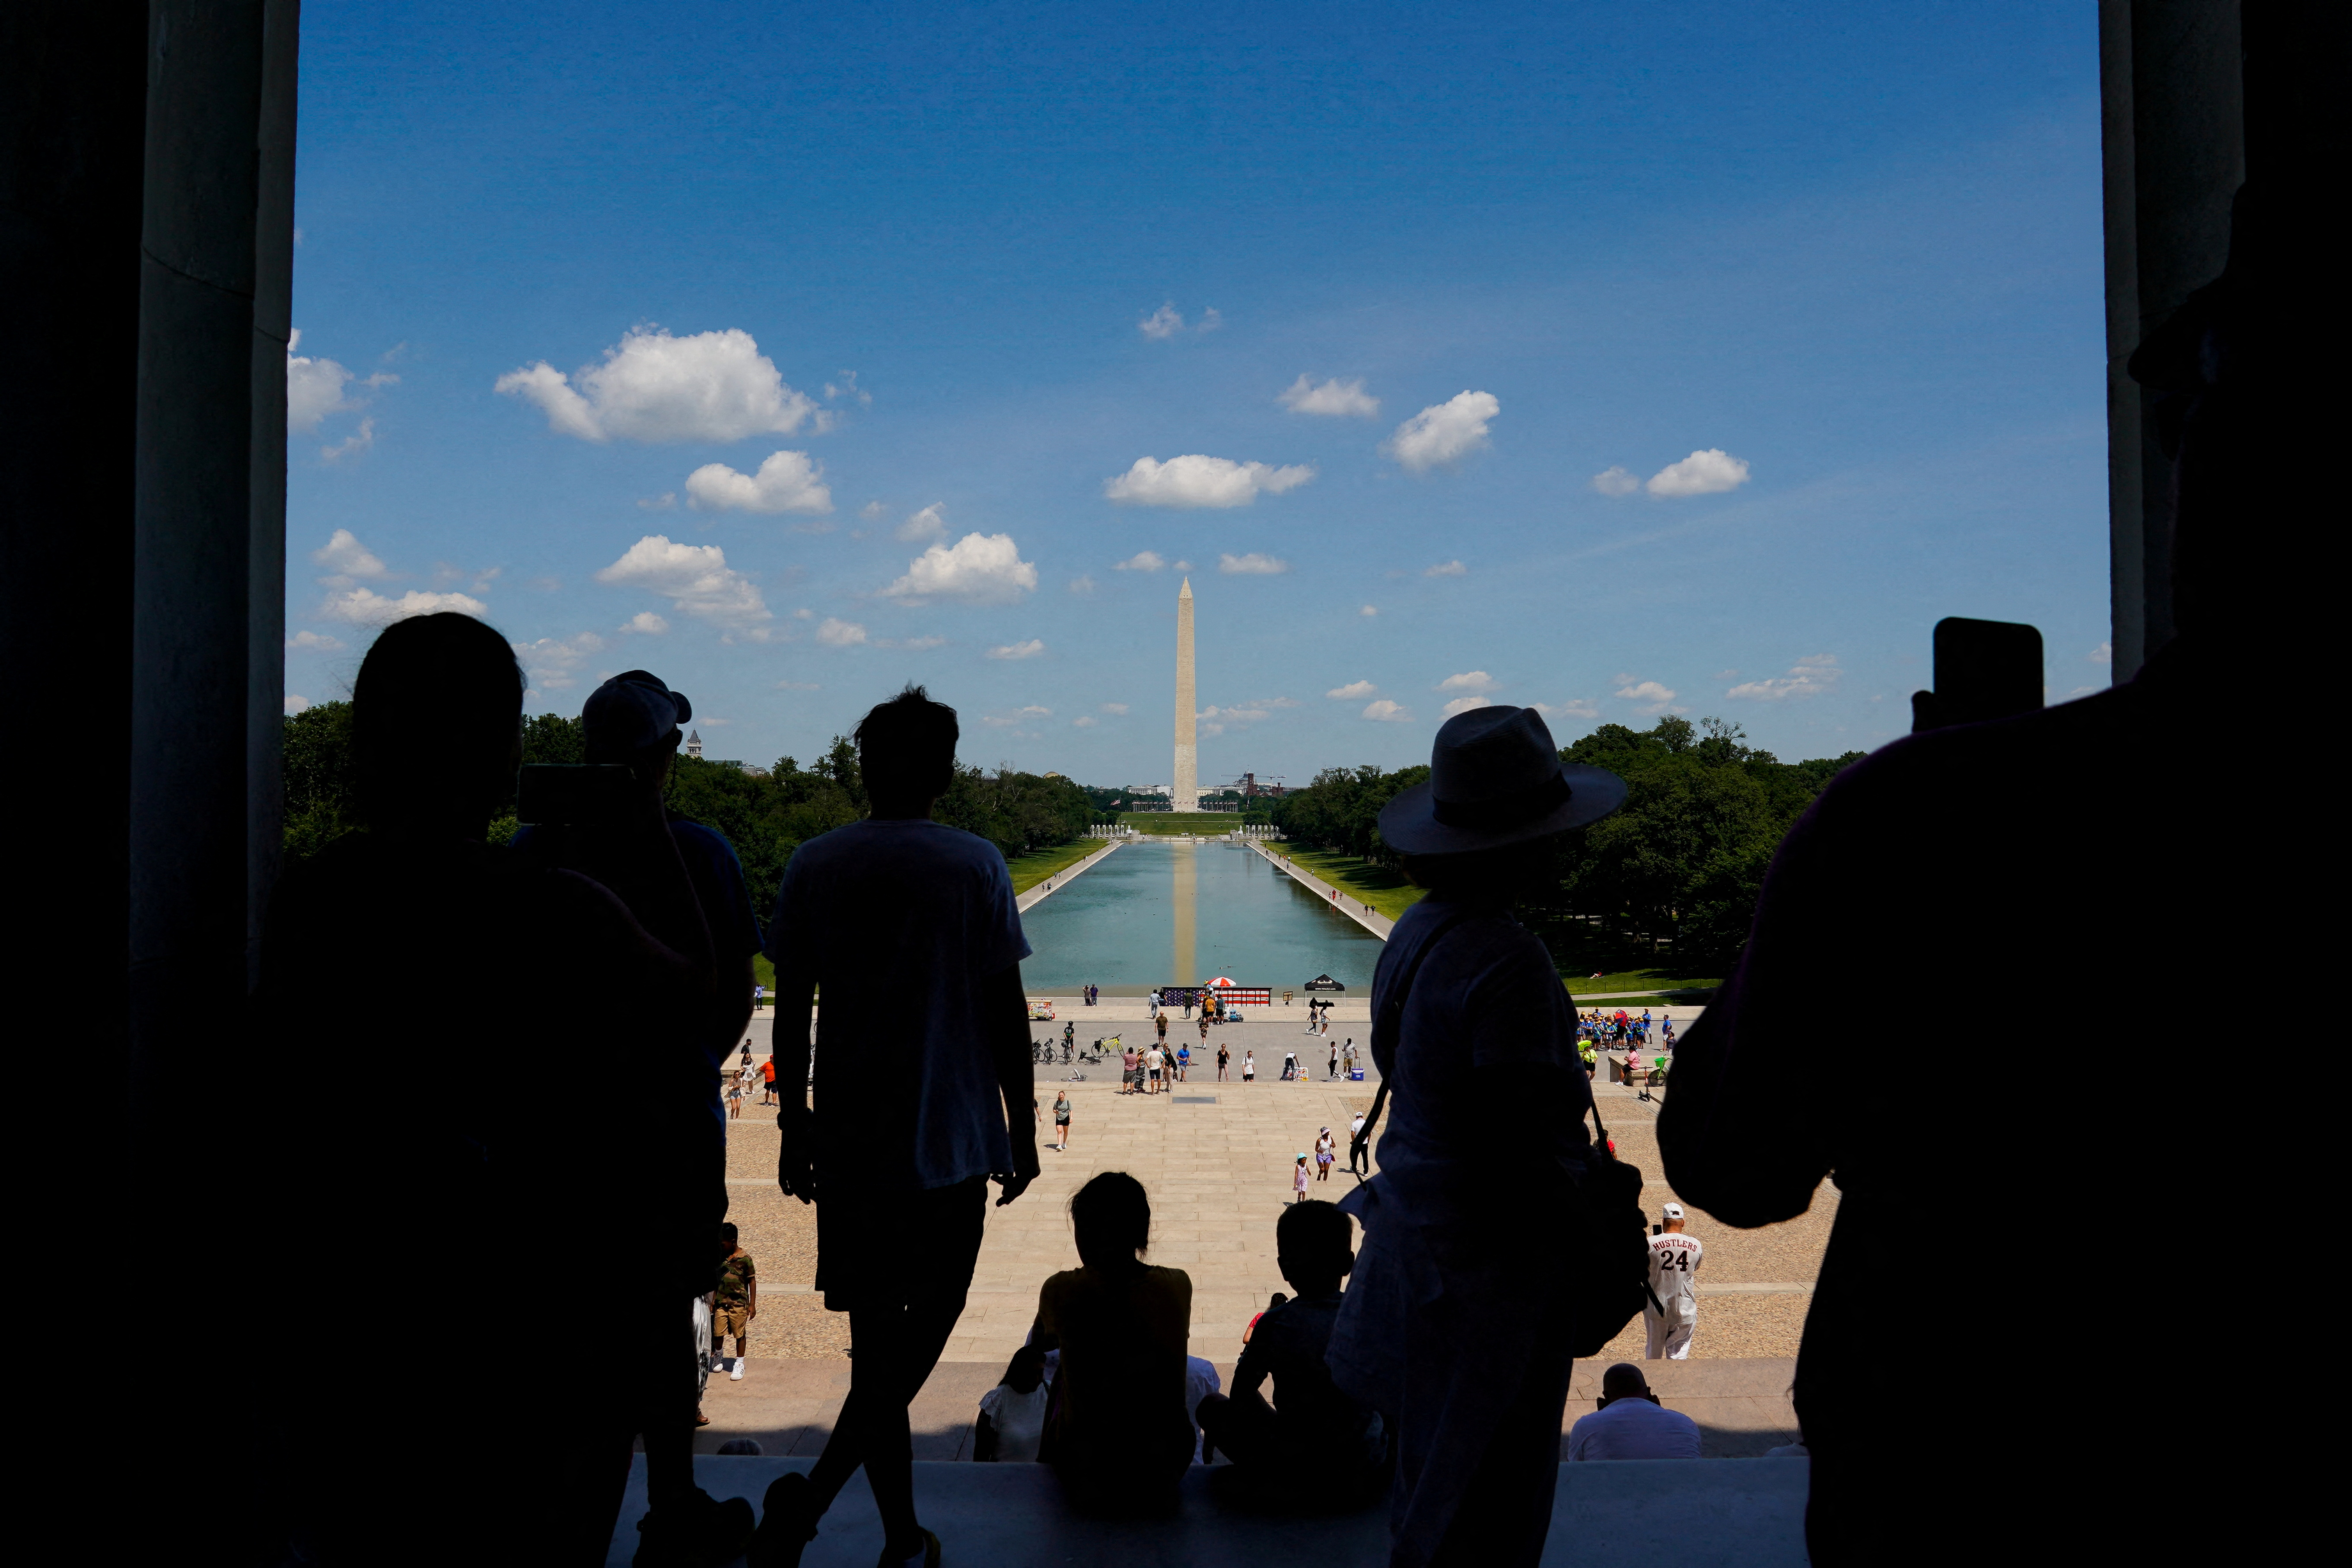 People visit the Lincoln Memorial on the 100th anniversary of its dedication on Memorial Day in Washington